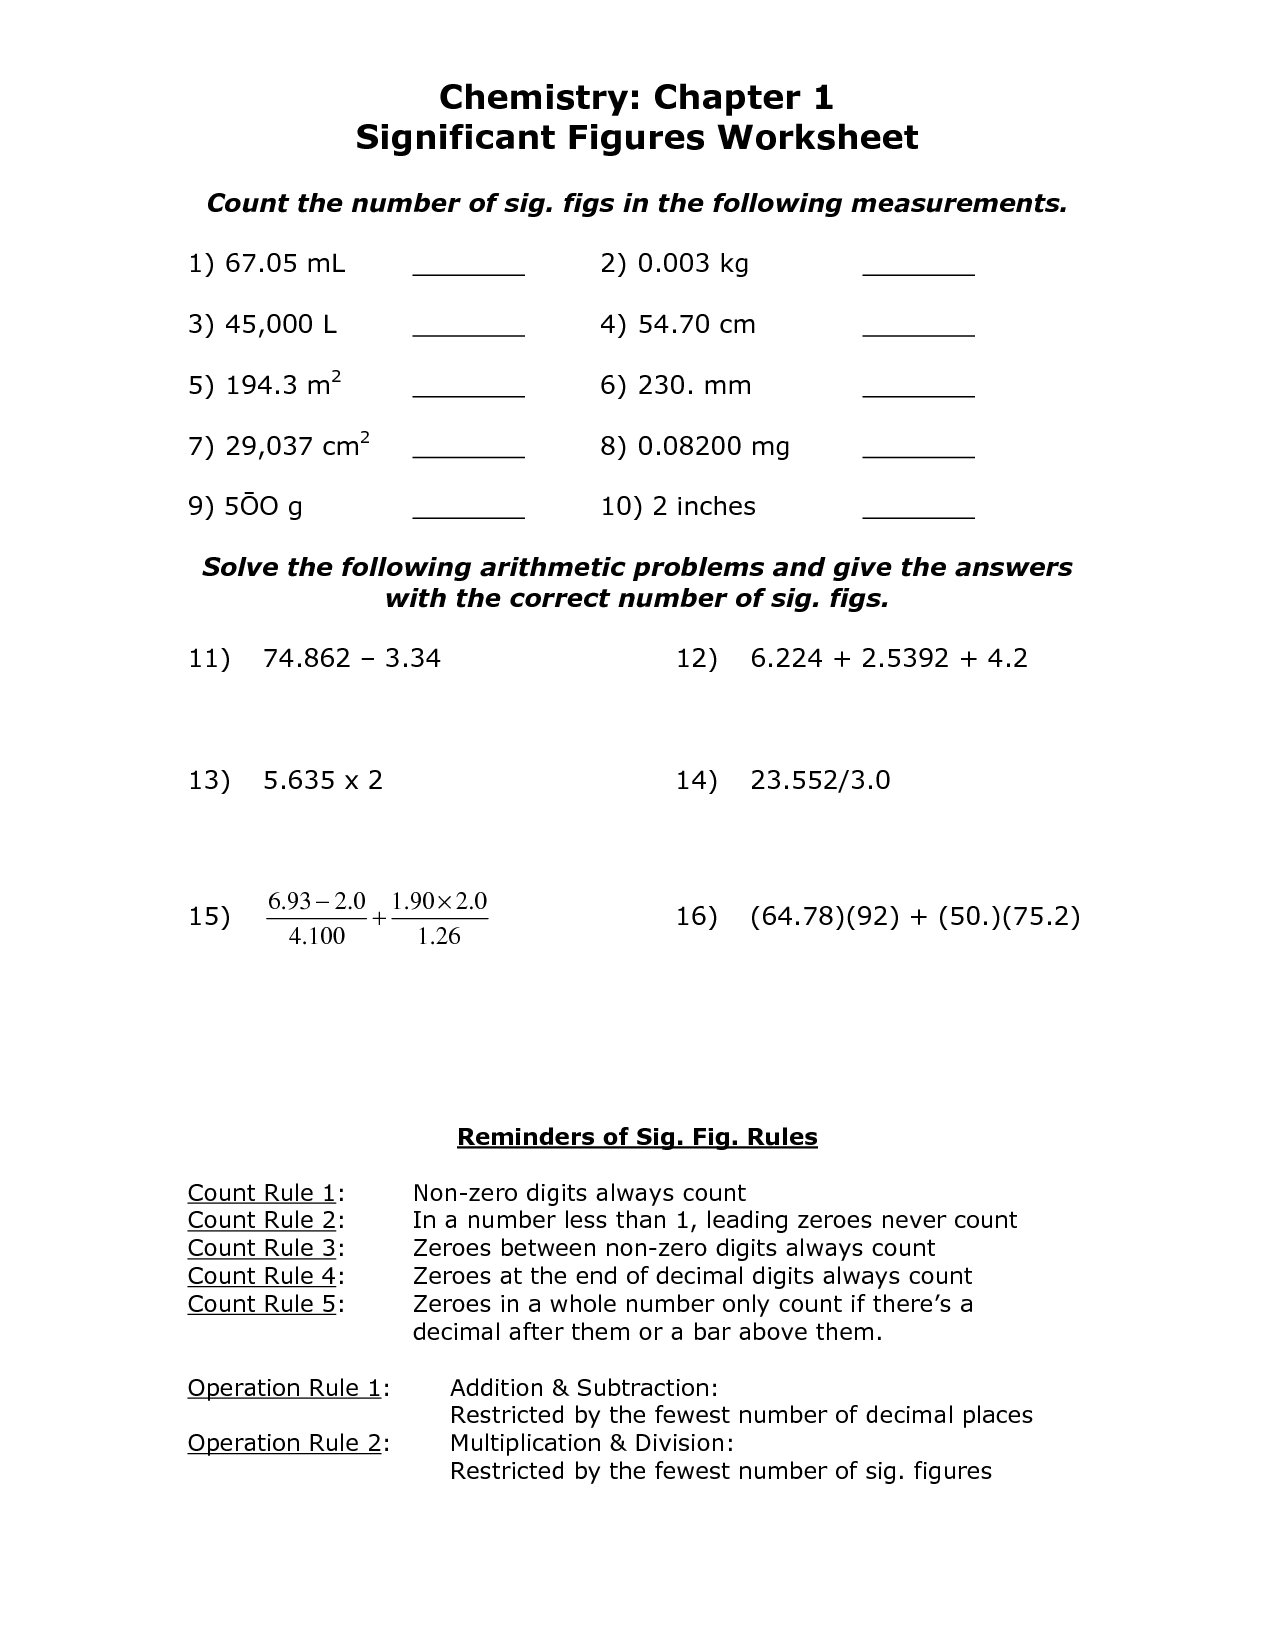 Significant Figures Chemistry Worksheet Answers Image